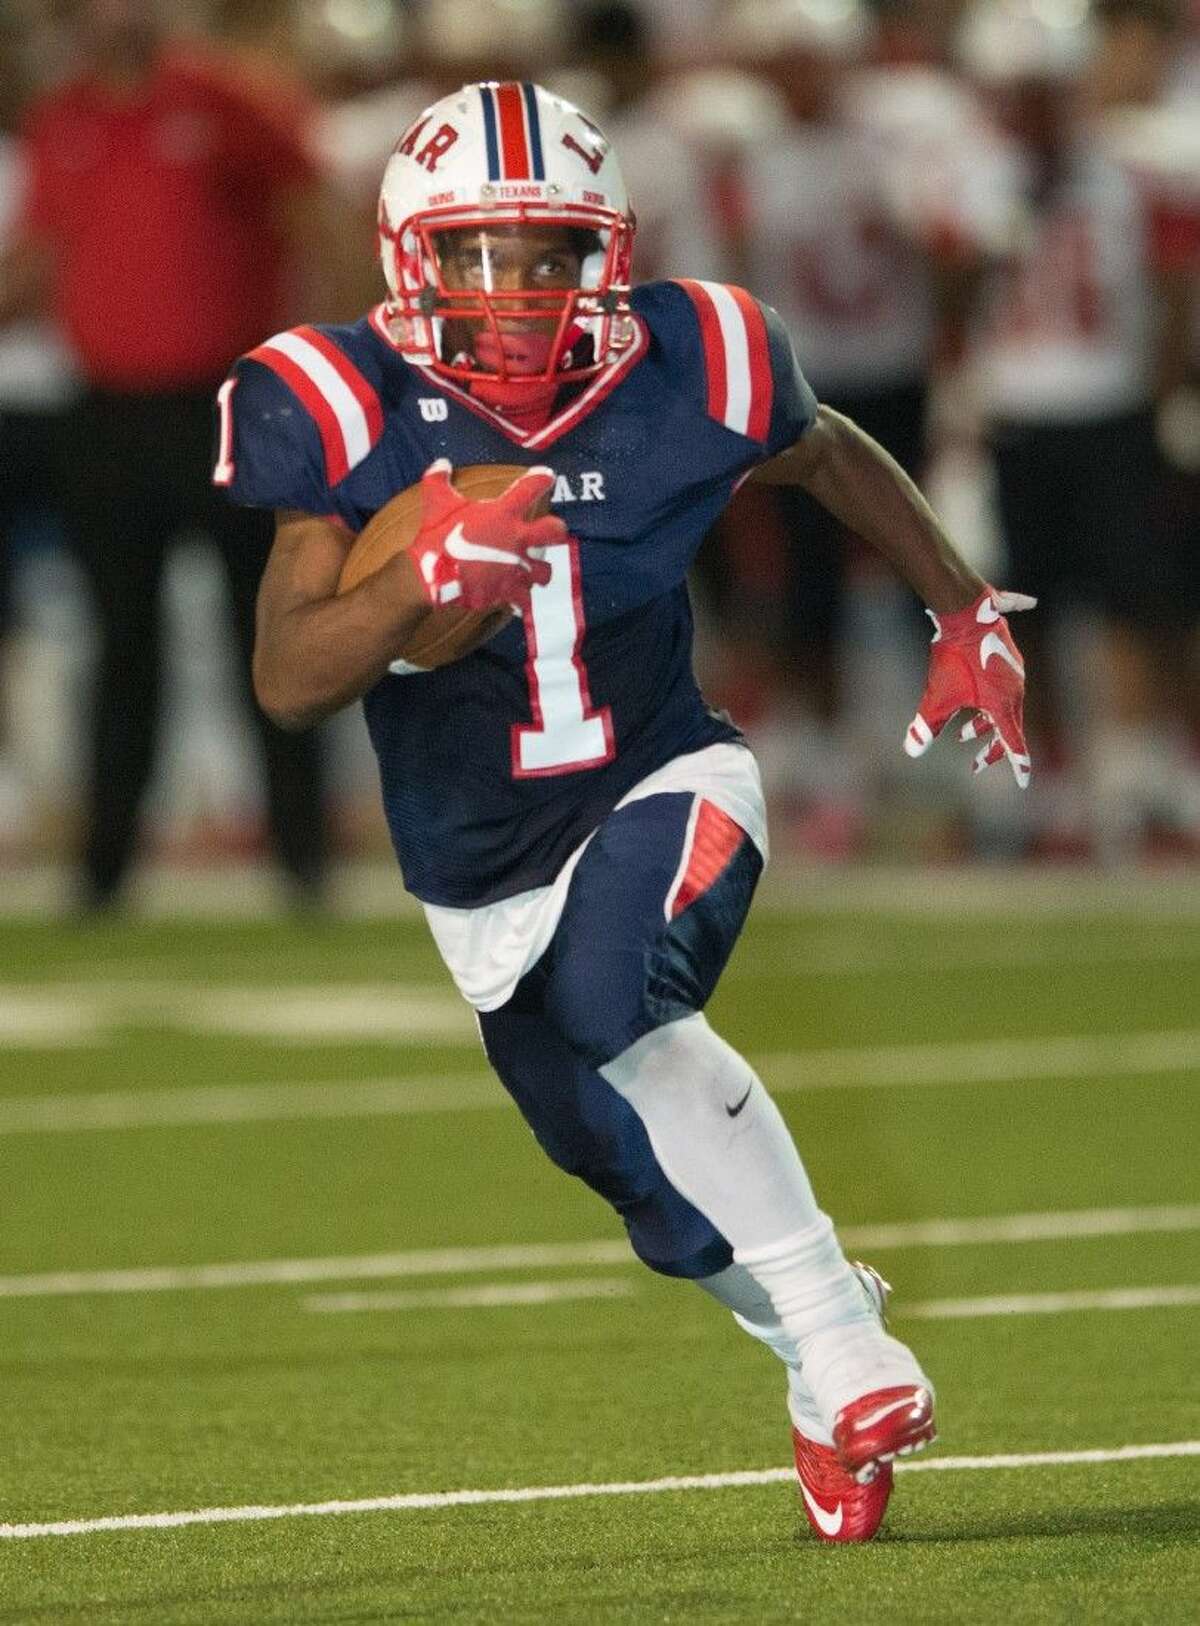 Lamar sophomore running back Ta’Zhawn Henry was named the District 20-6A Co-MVP Offensive Player of the Year along with Reagan running back Fred Cooper.